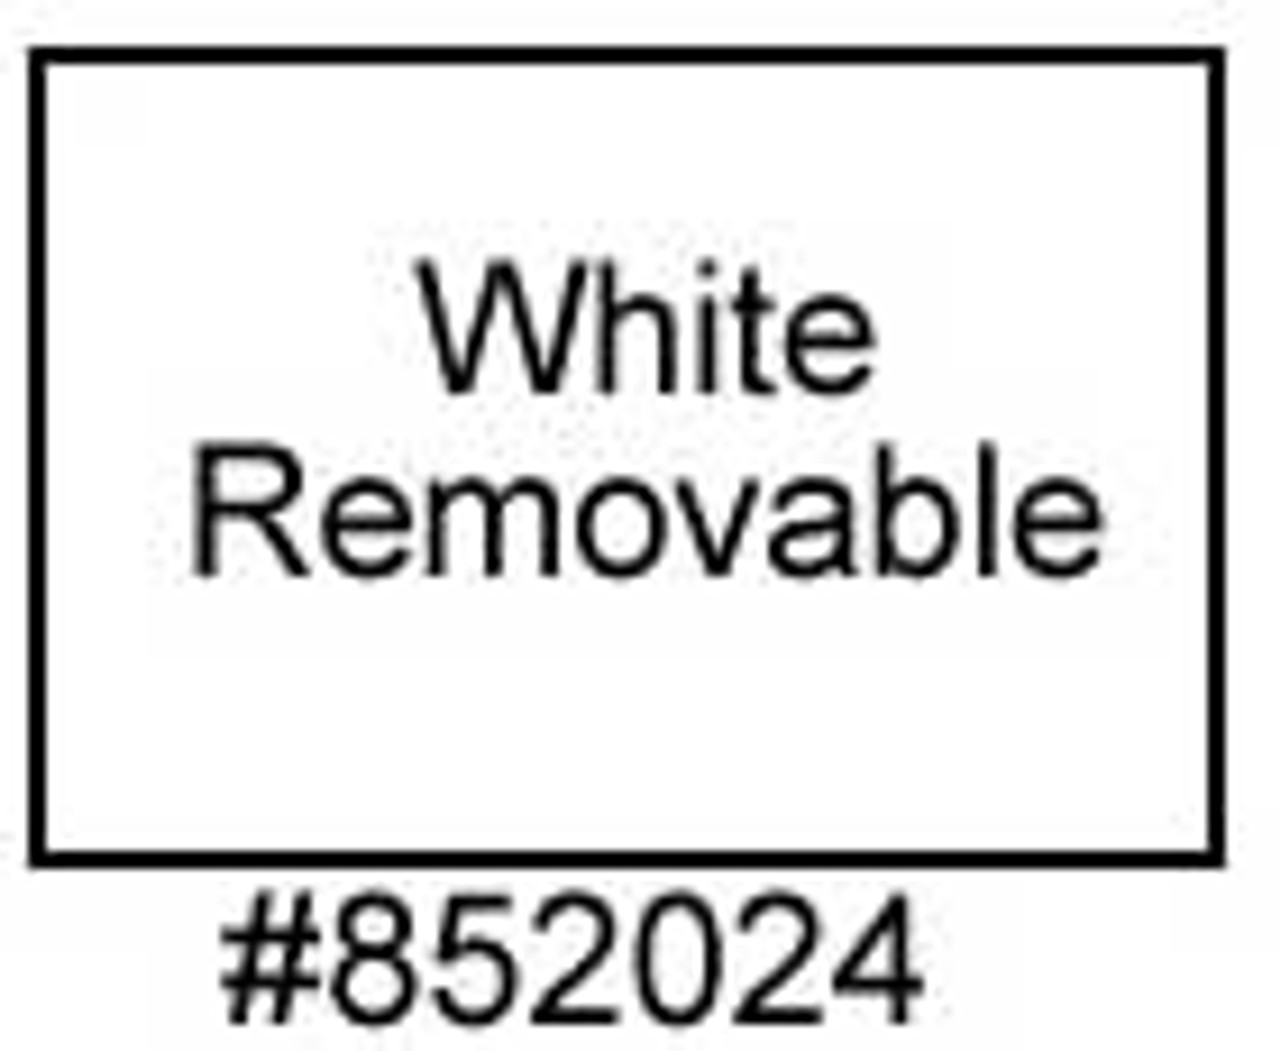 White Removable Labels for use with Towa 2 Labellers